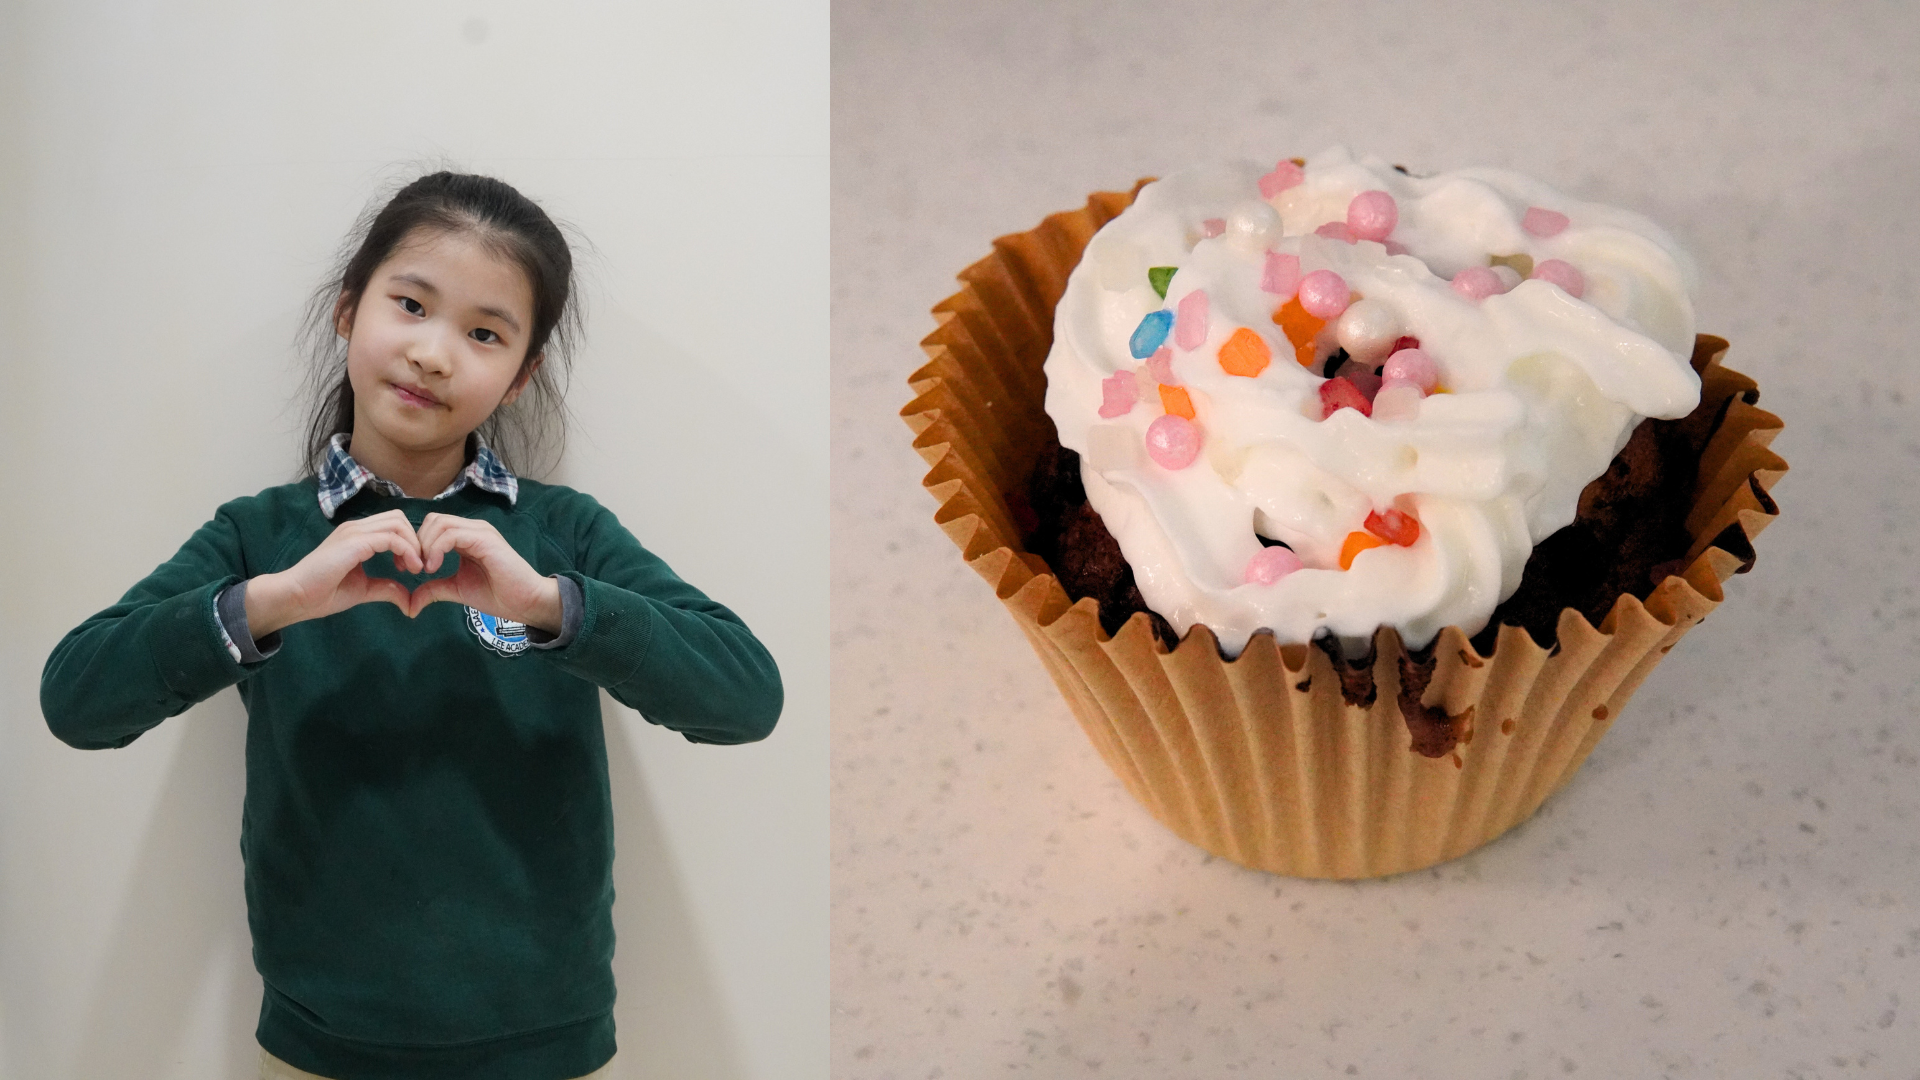 Keren baked a chocolate cupcake with her baking club crew. As a final touch, she added white frosting and her special combination of multicolored sprinkles. 
